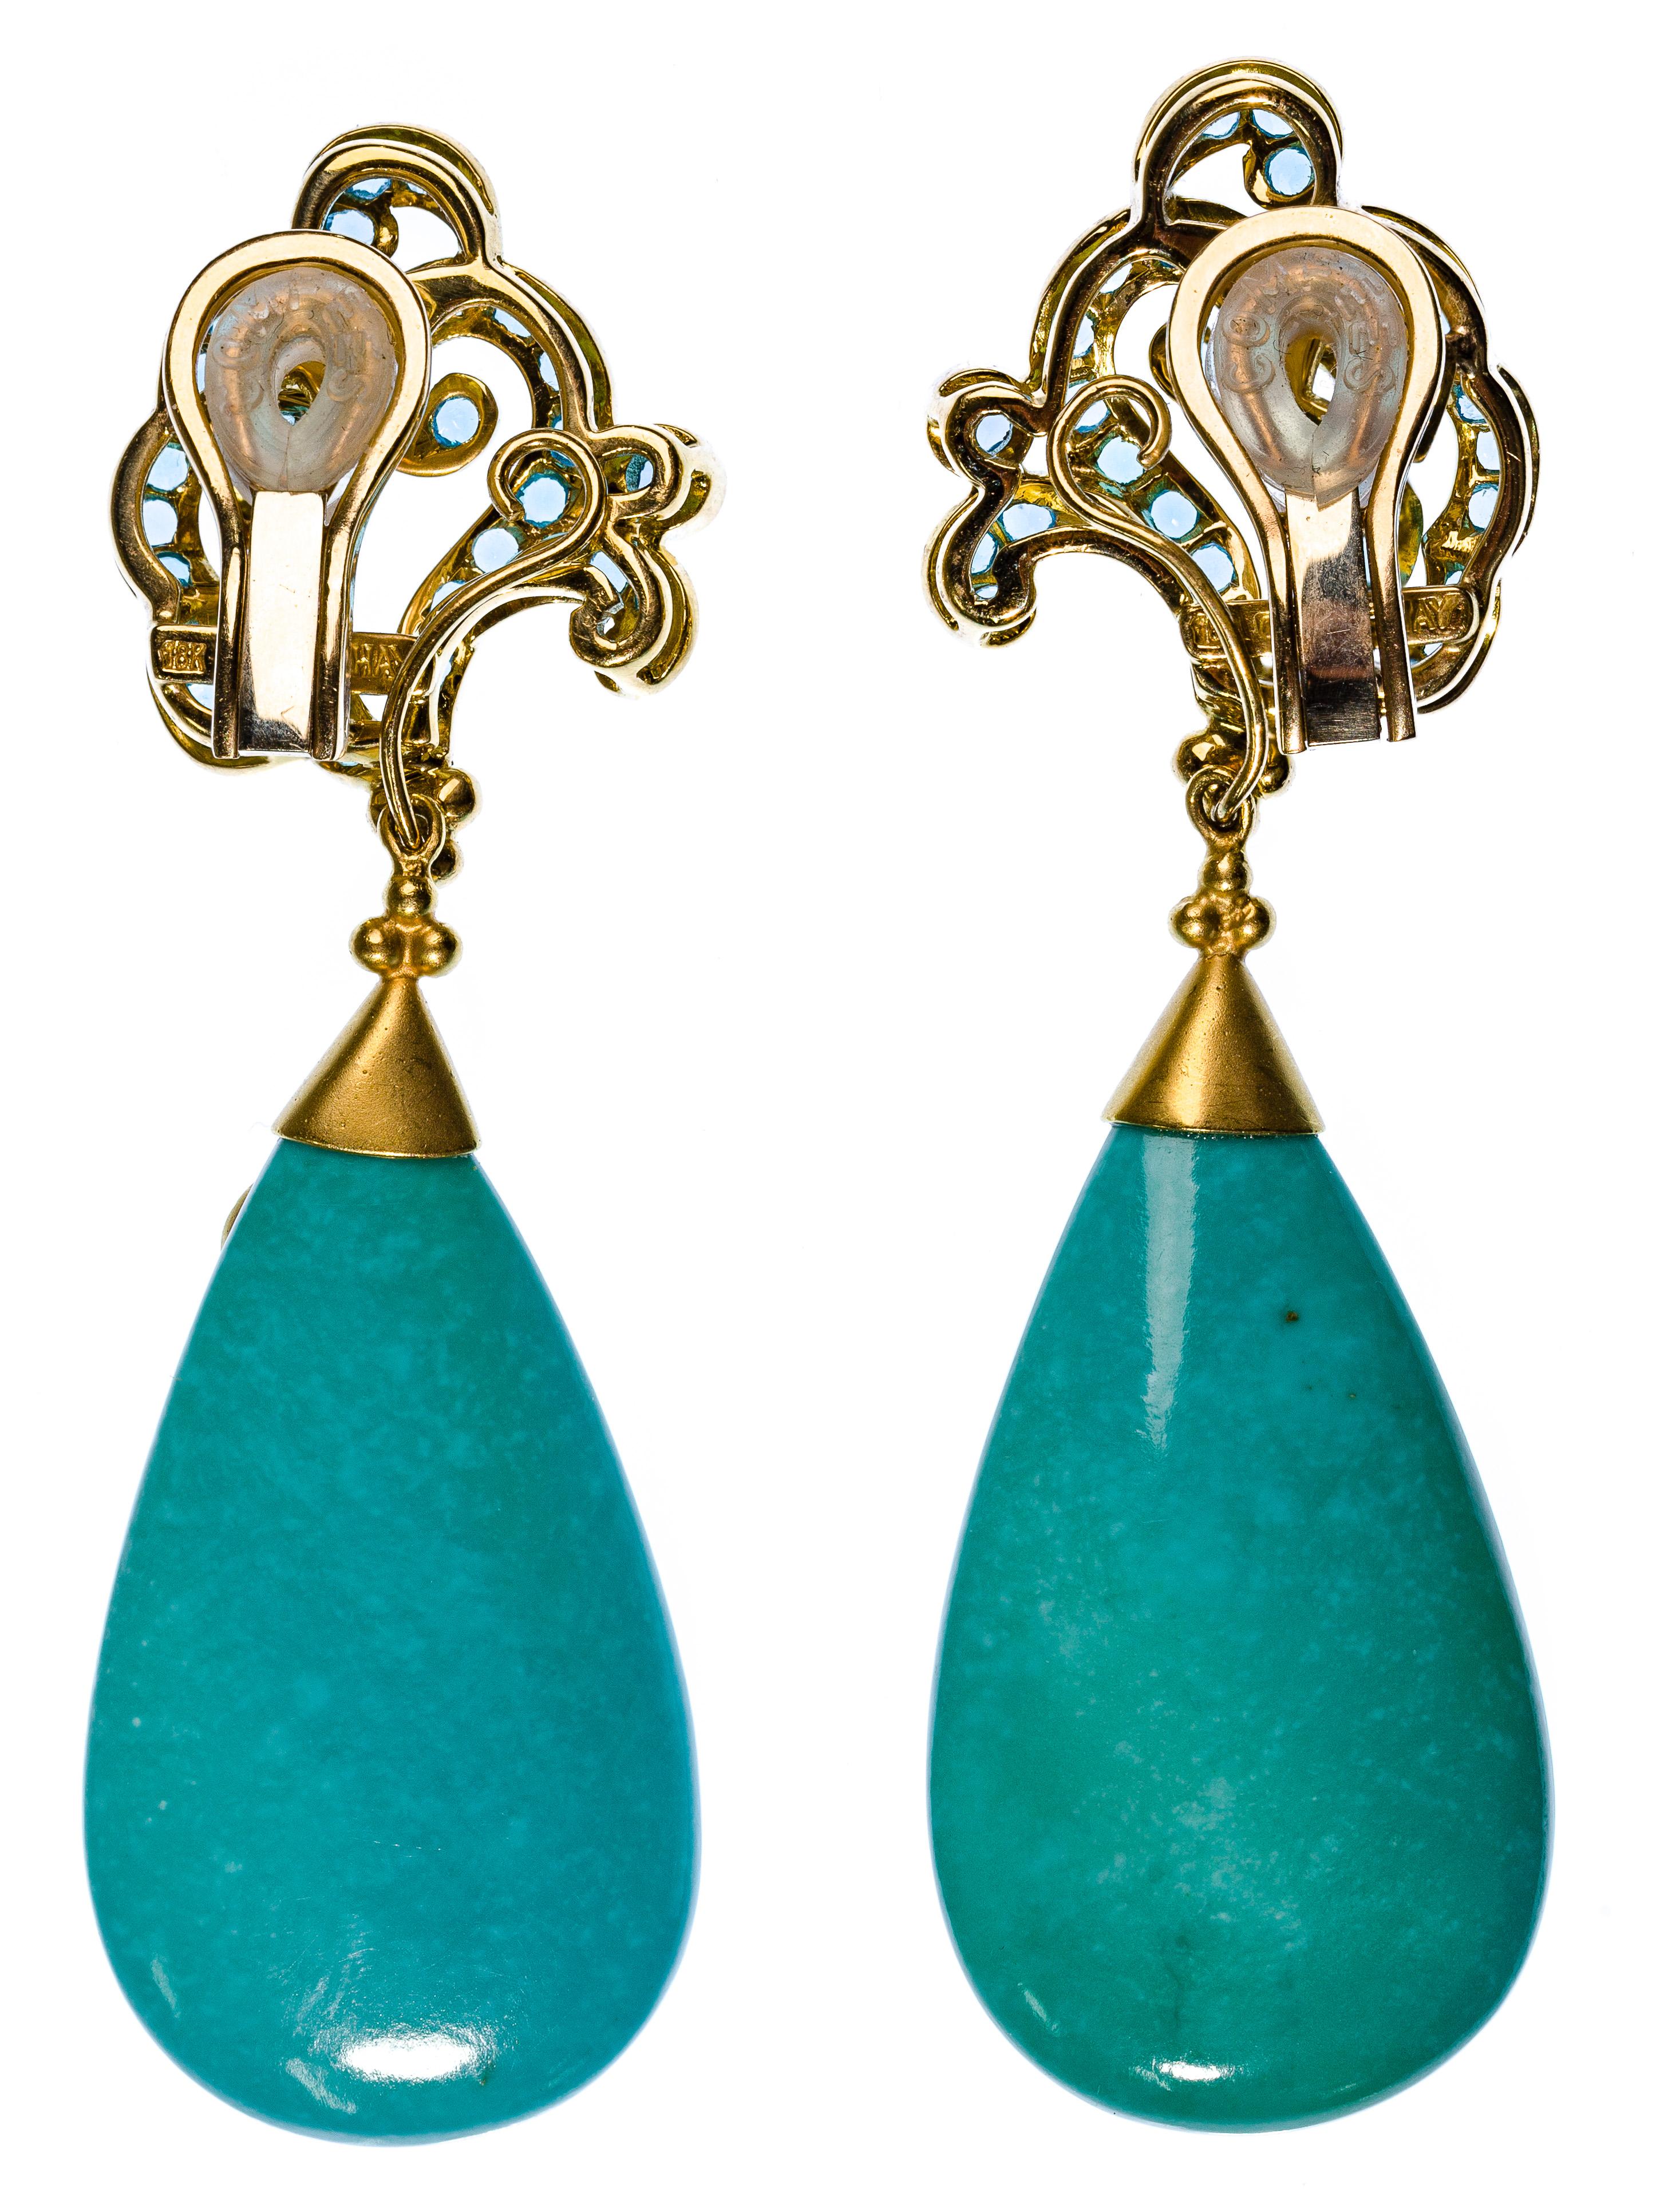 Paula Crevoshay 18k Yellow Gold and Gemstone Clip-on Earring Set. This lovely set of drop style earrings has a blue gemstone top and turquoise tear shaped bottom, stamp signed and marked '18k'.

Dimensions
Length: 3 inches, Width: 7/8 inches
Weight: